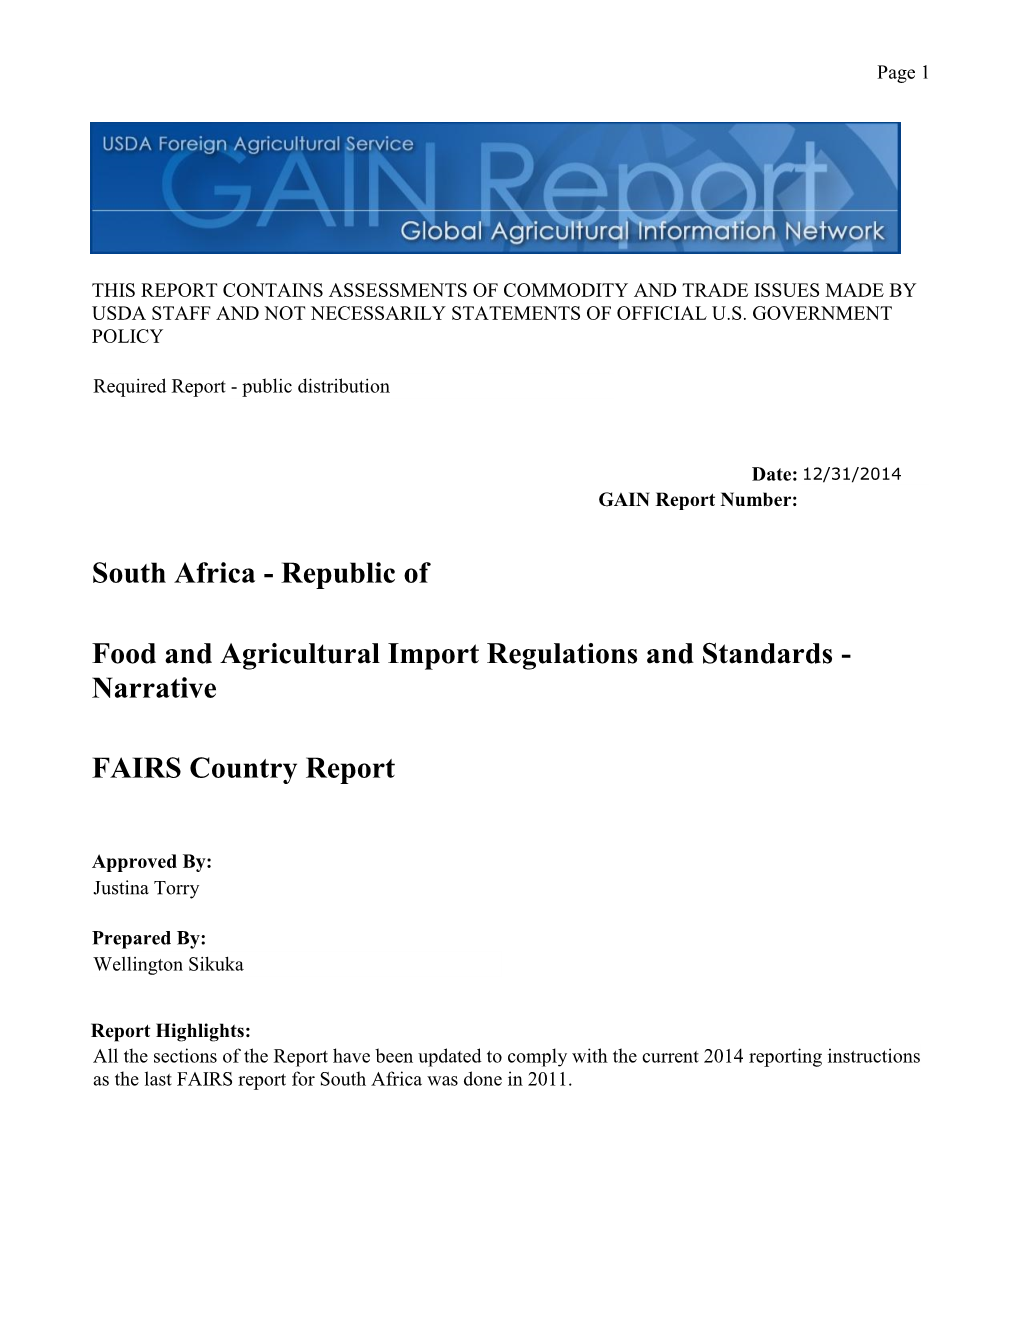 FAIRS Country Report Food and Agricultural Import Regulations and Standards